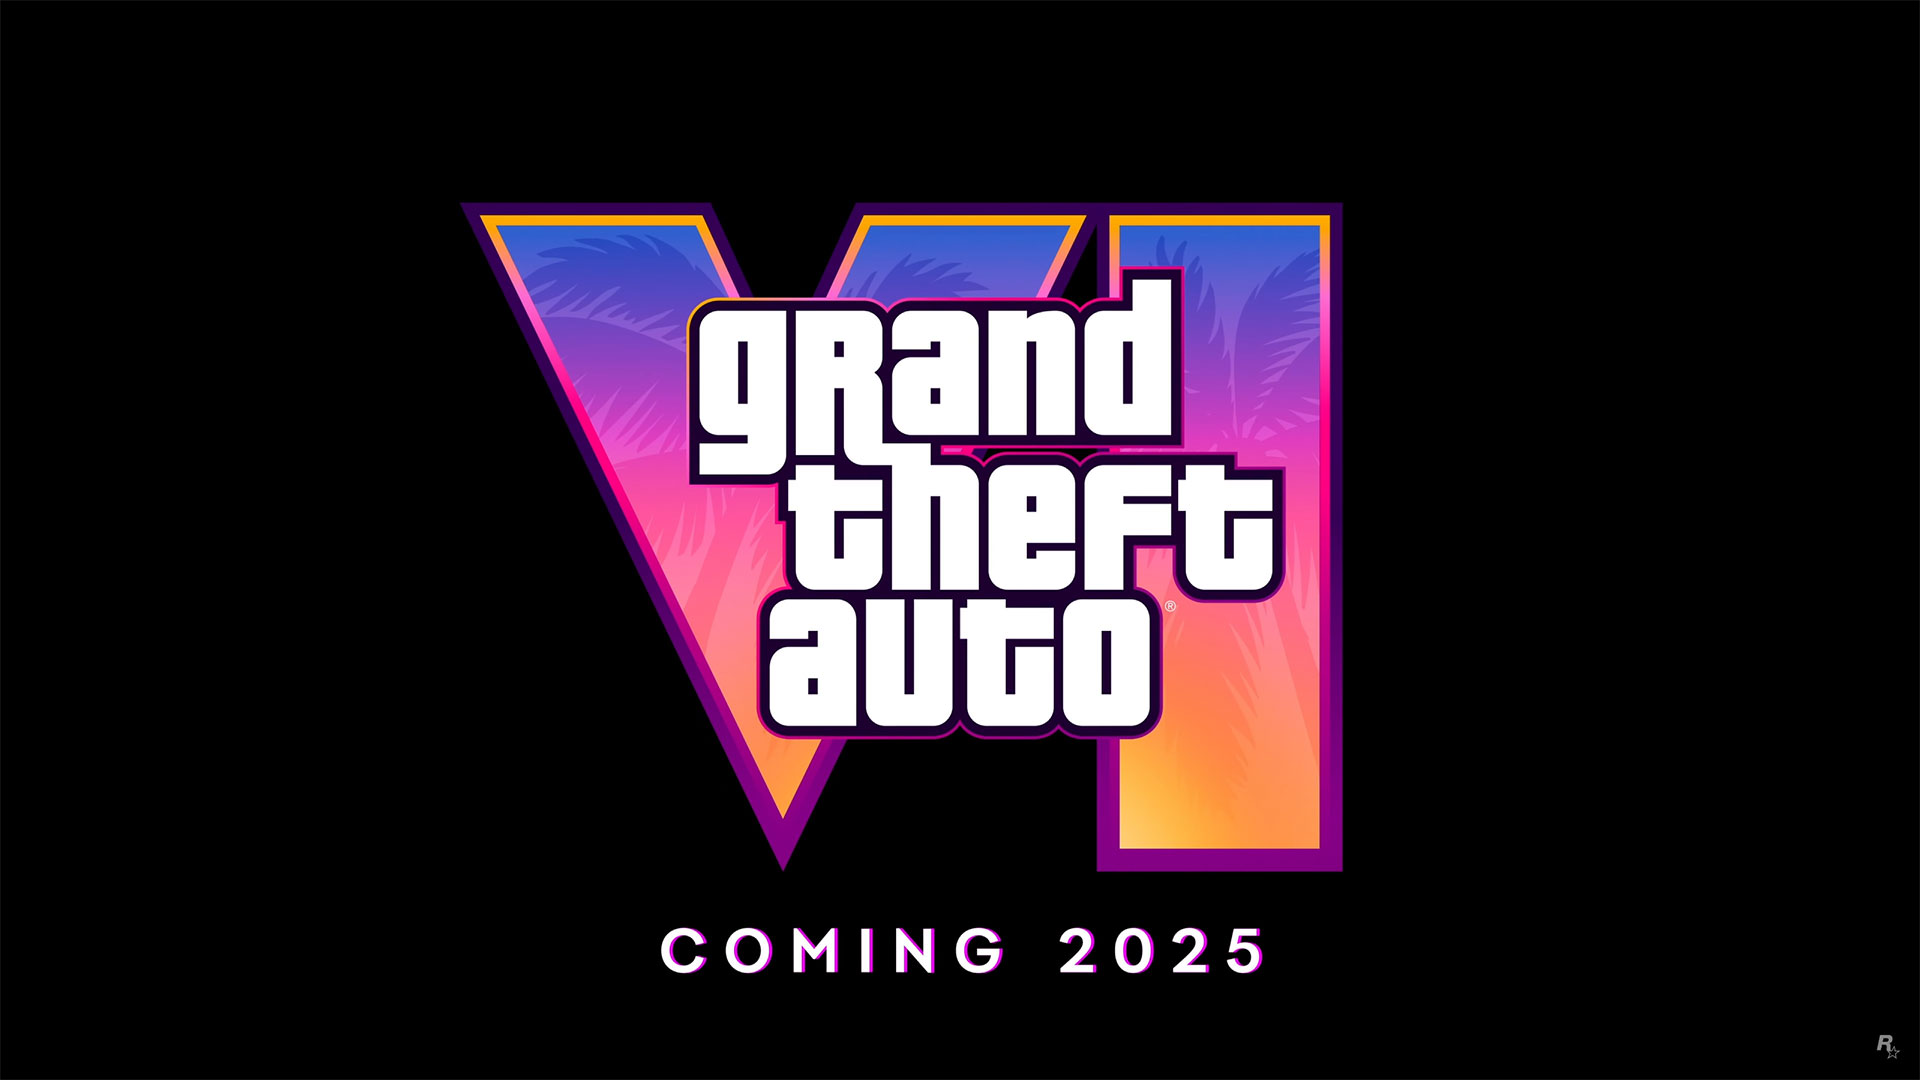 The first trailer for the highly anticipated Grand Theft Auto VI has arrived